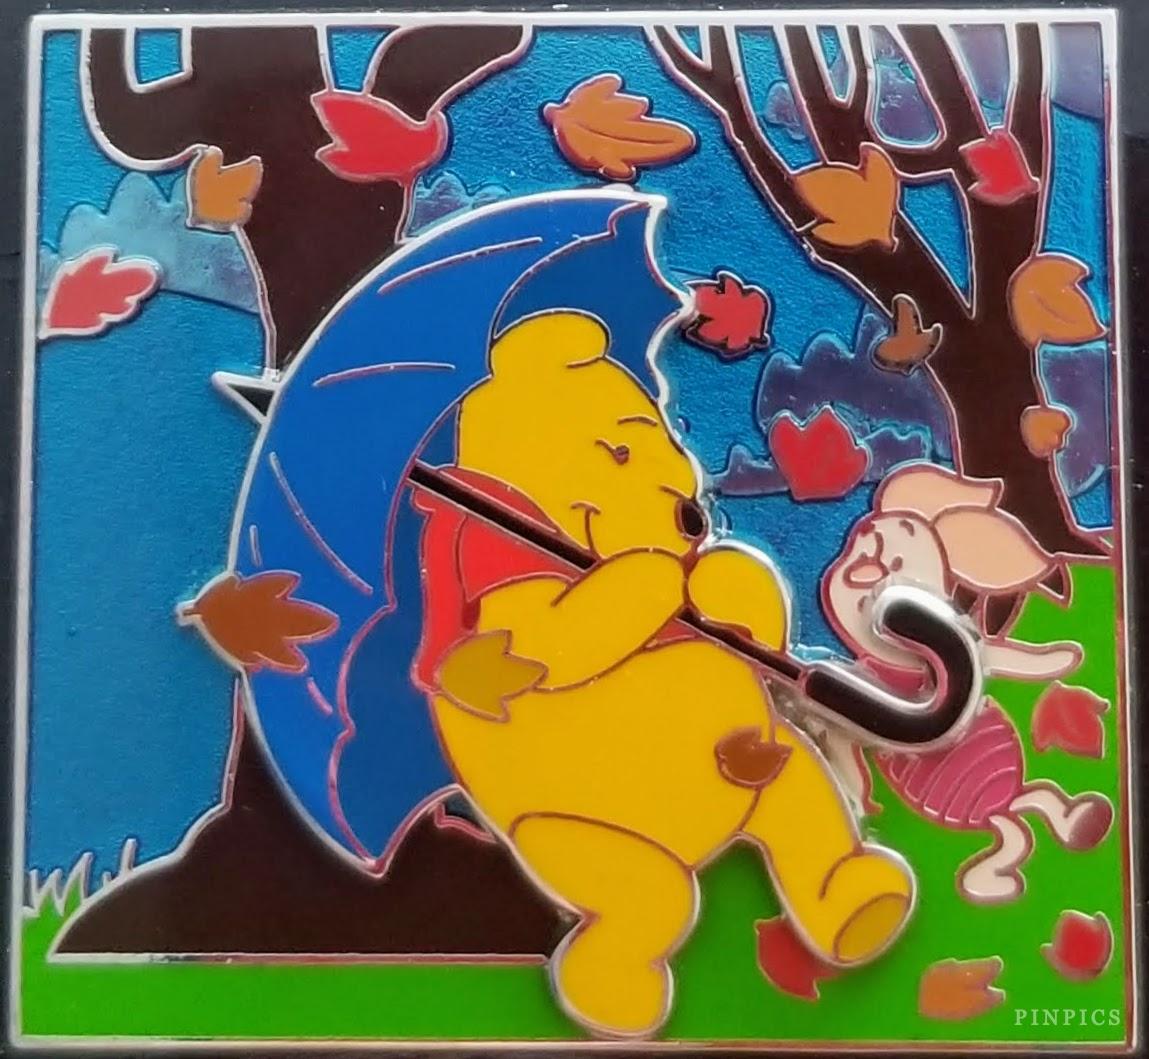 Pooh and Piglet - Winnie the Pooh - Blustery Day - Umbrella - Slider